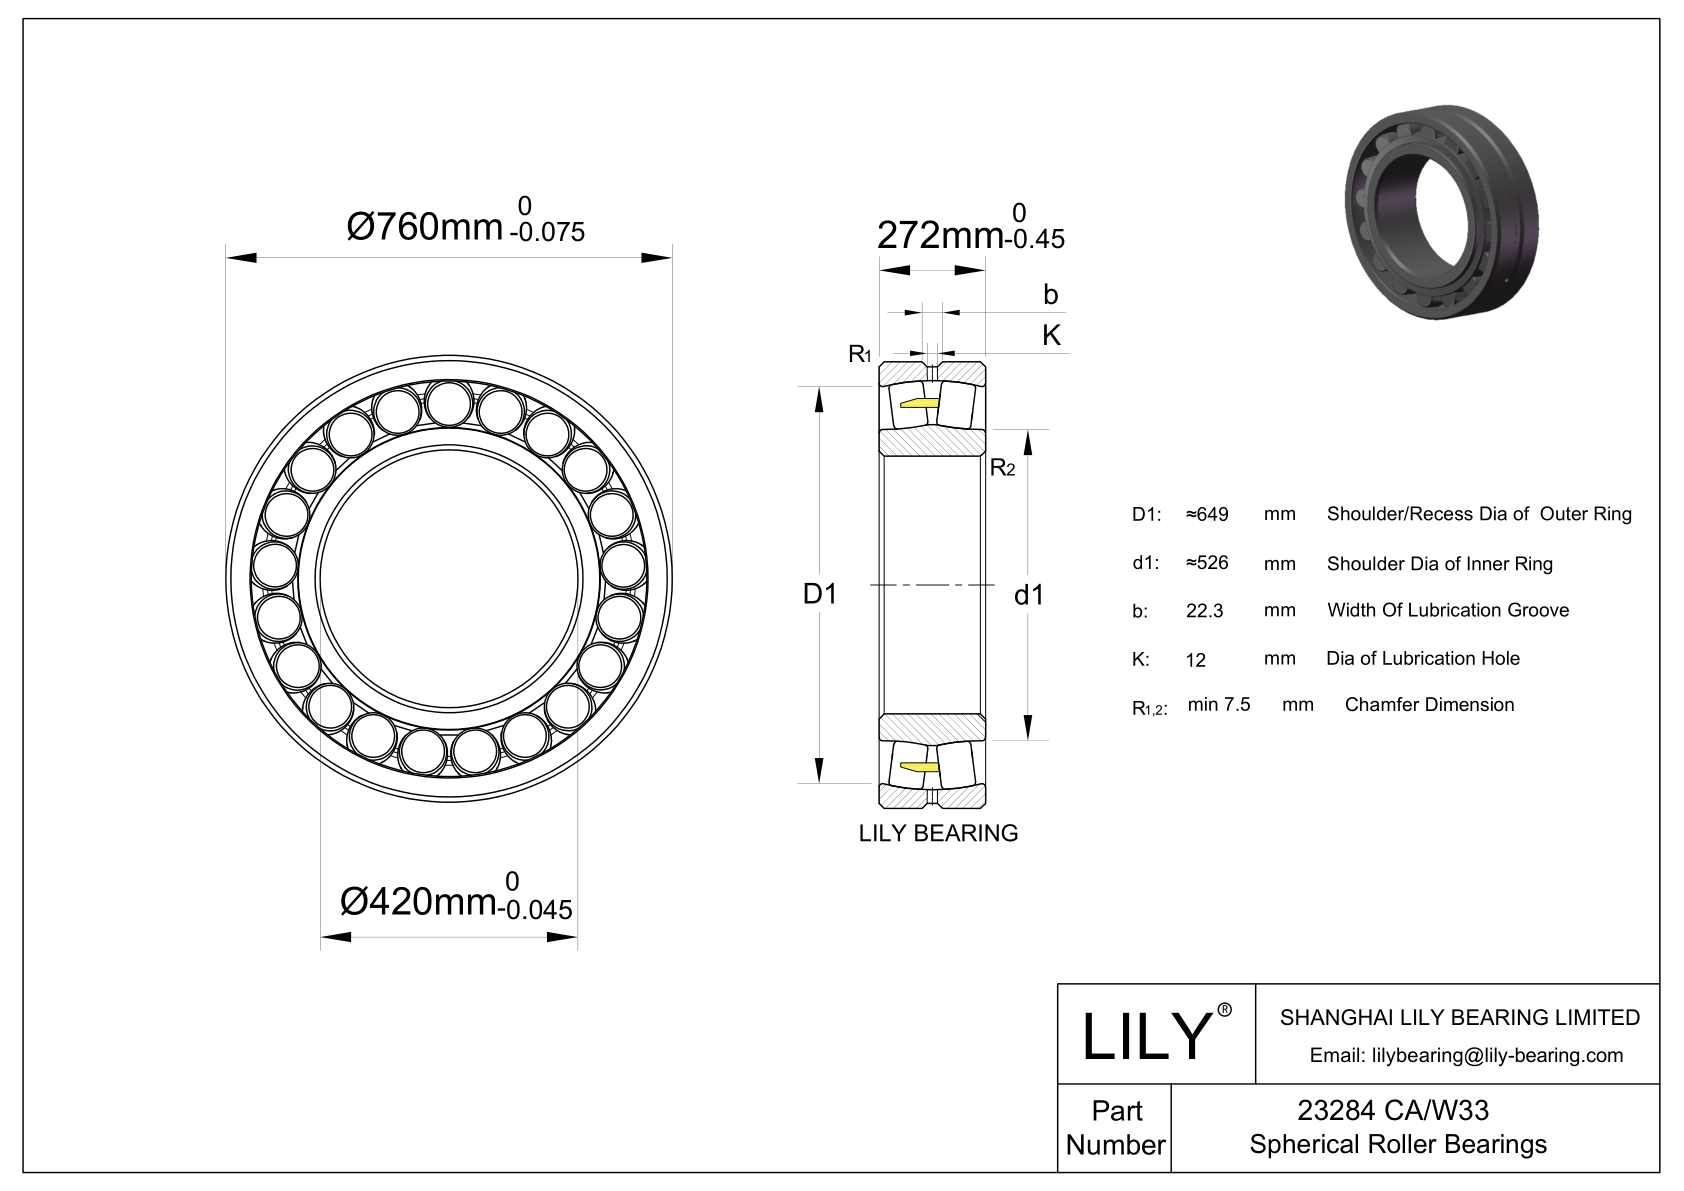 23284 CA/W33 Double Row Spherical Roller Bearing cad drawing